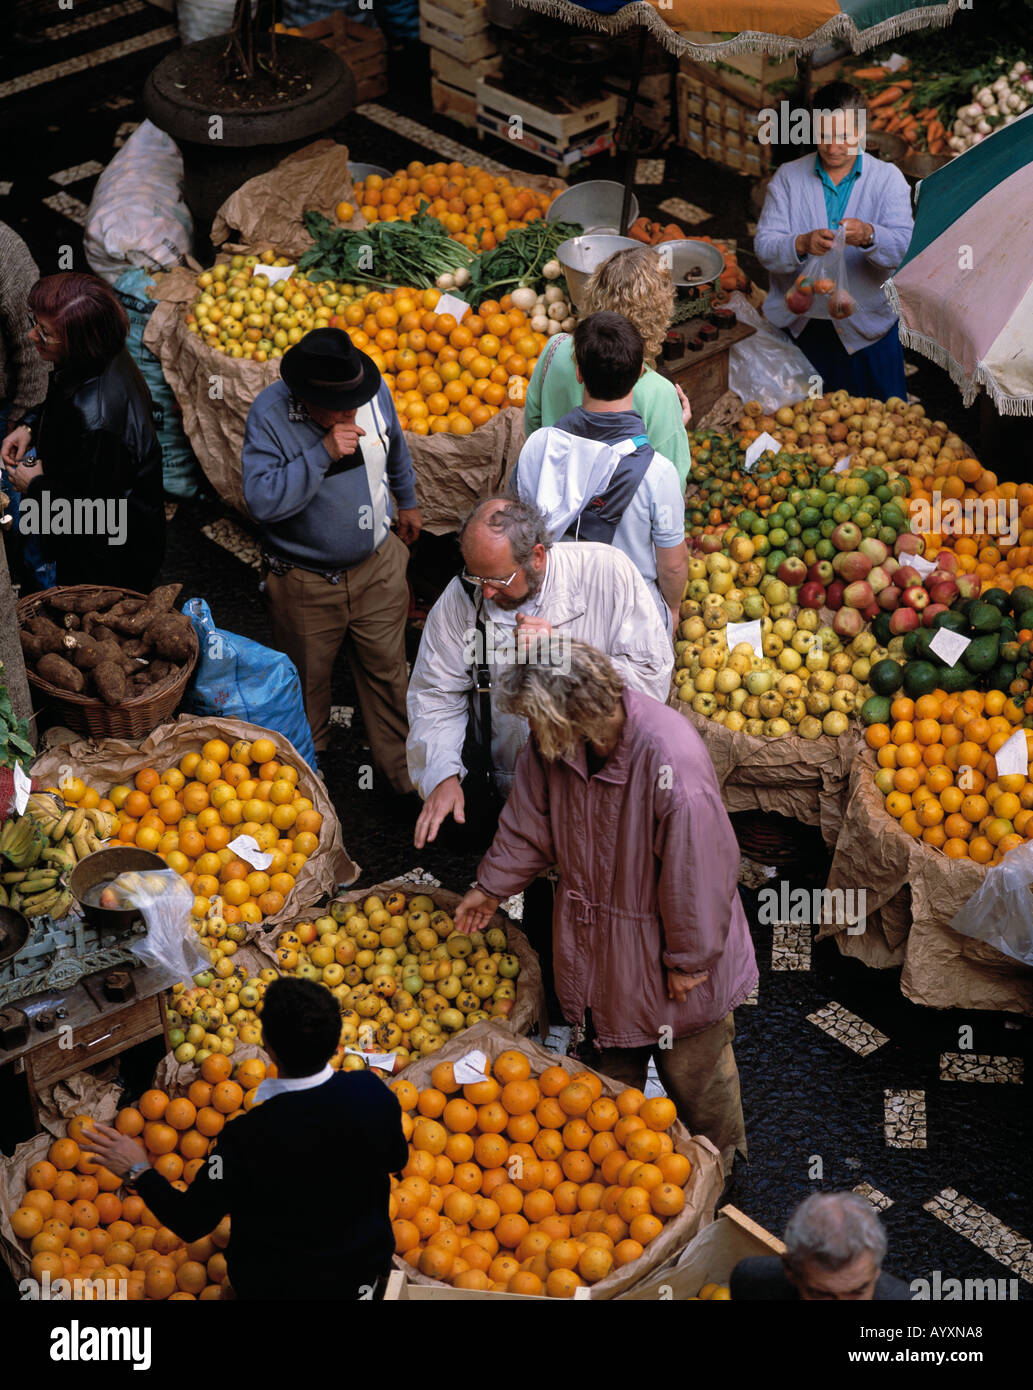 Portugal, Madeira, P-Funchal, covered market, fruit, vegetables Stock Photo